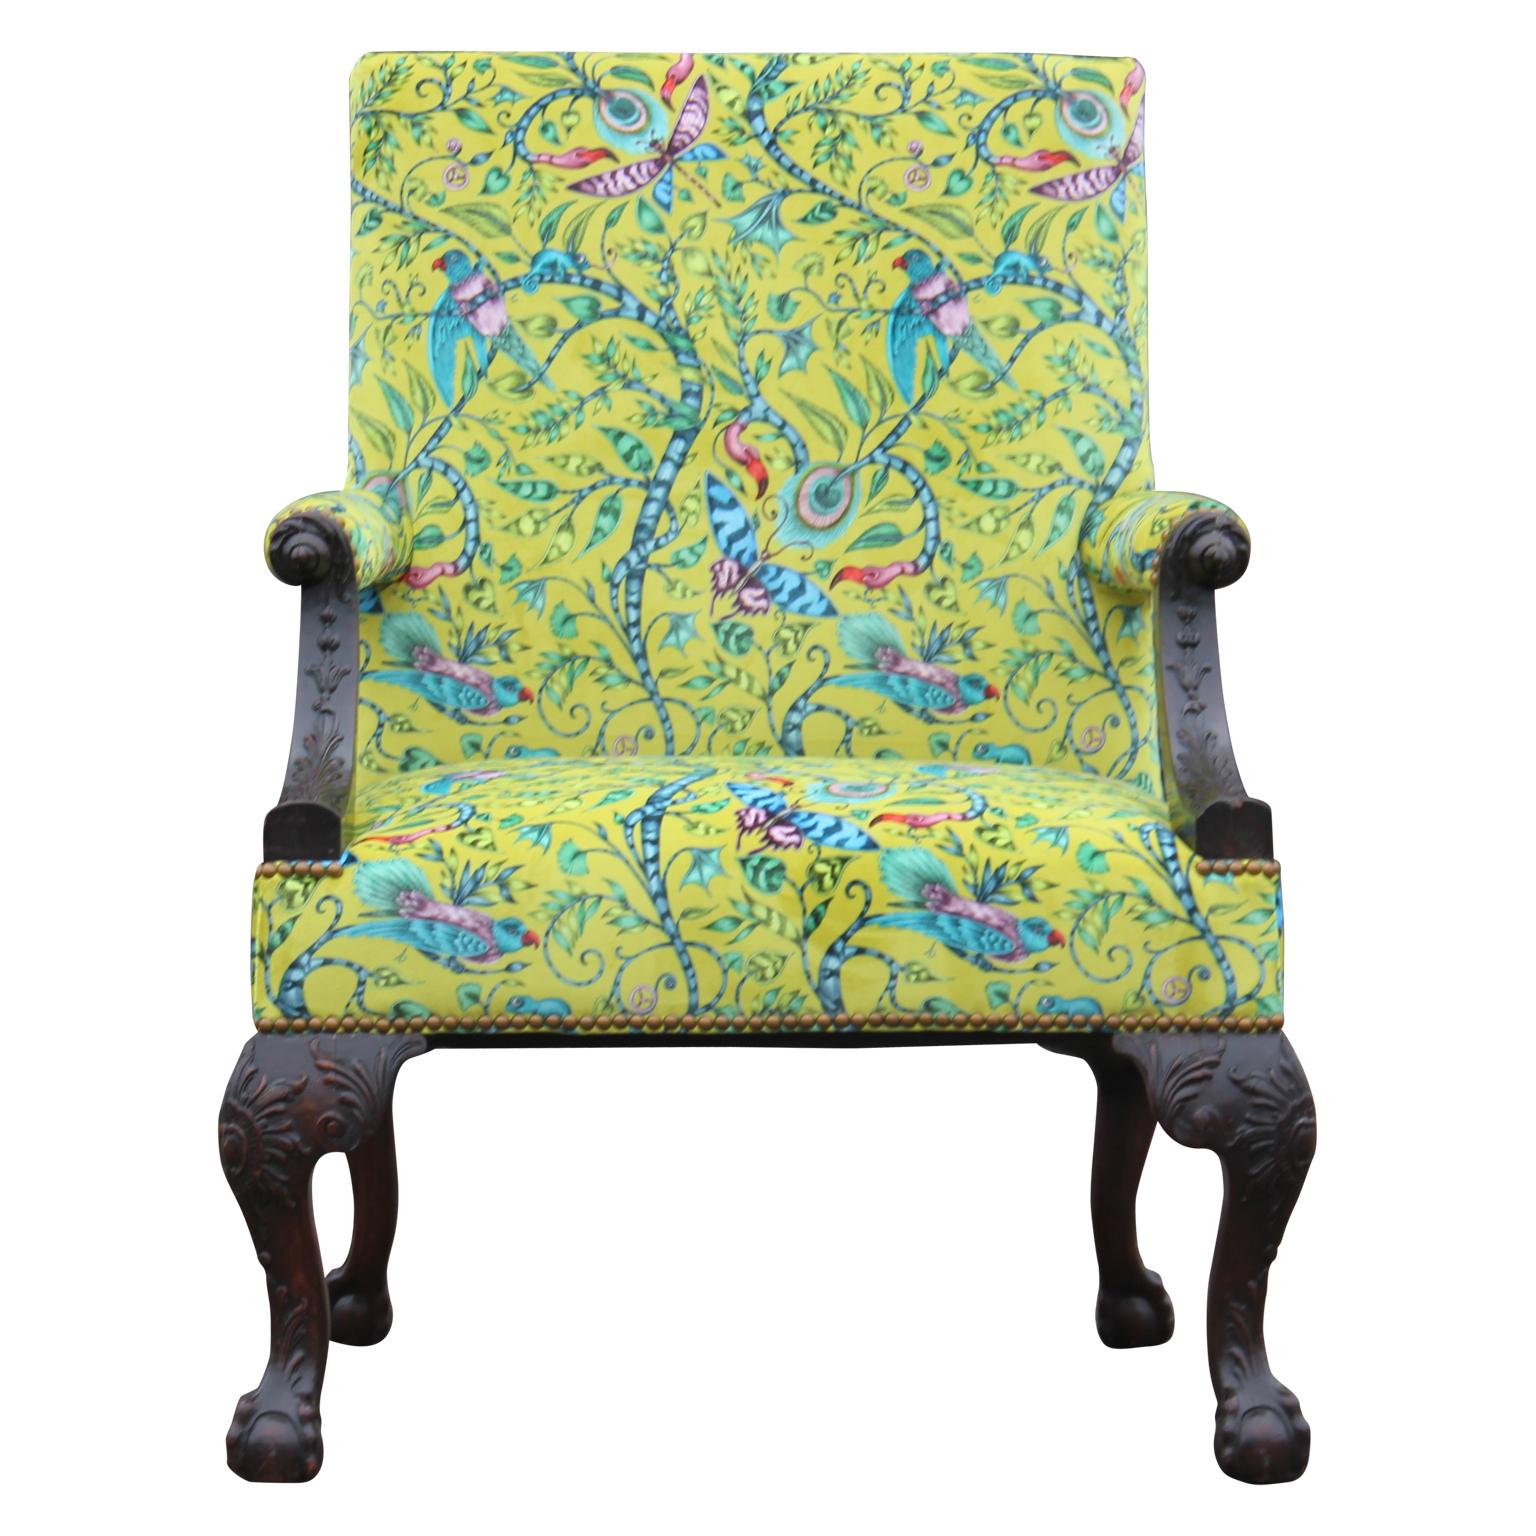 Beautiful 18th century American George the 2nd library / high carved Gainsborough chair. Chair is custom upholstered in whimsical yellow pattern fabric by Clarke & Clarke.  Chair is stamped with 